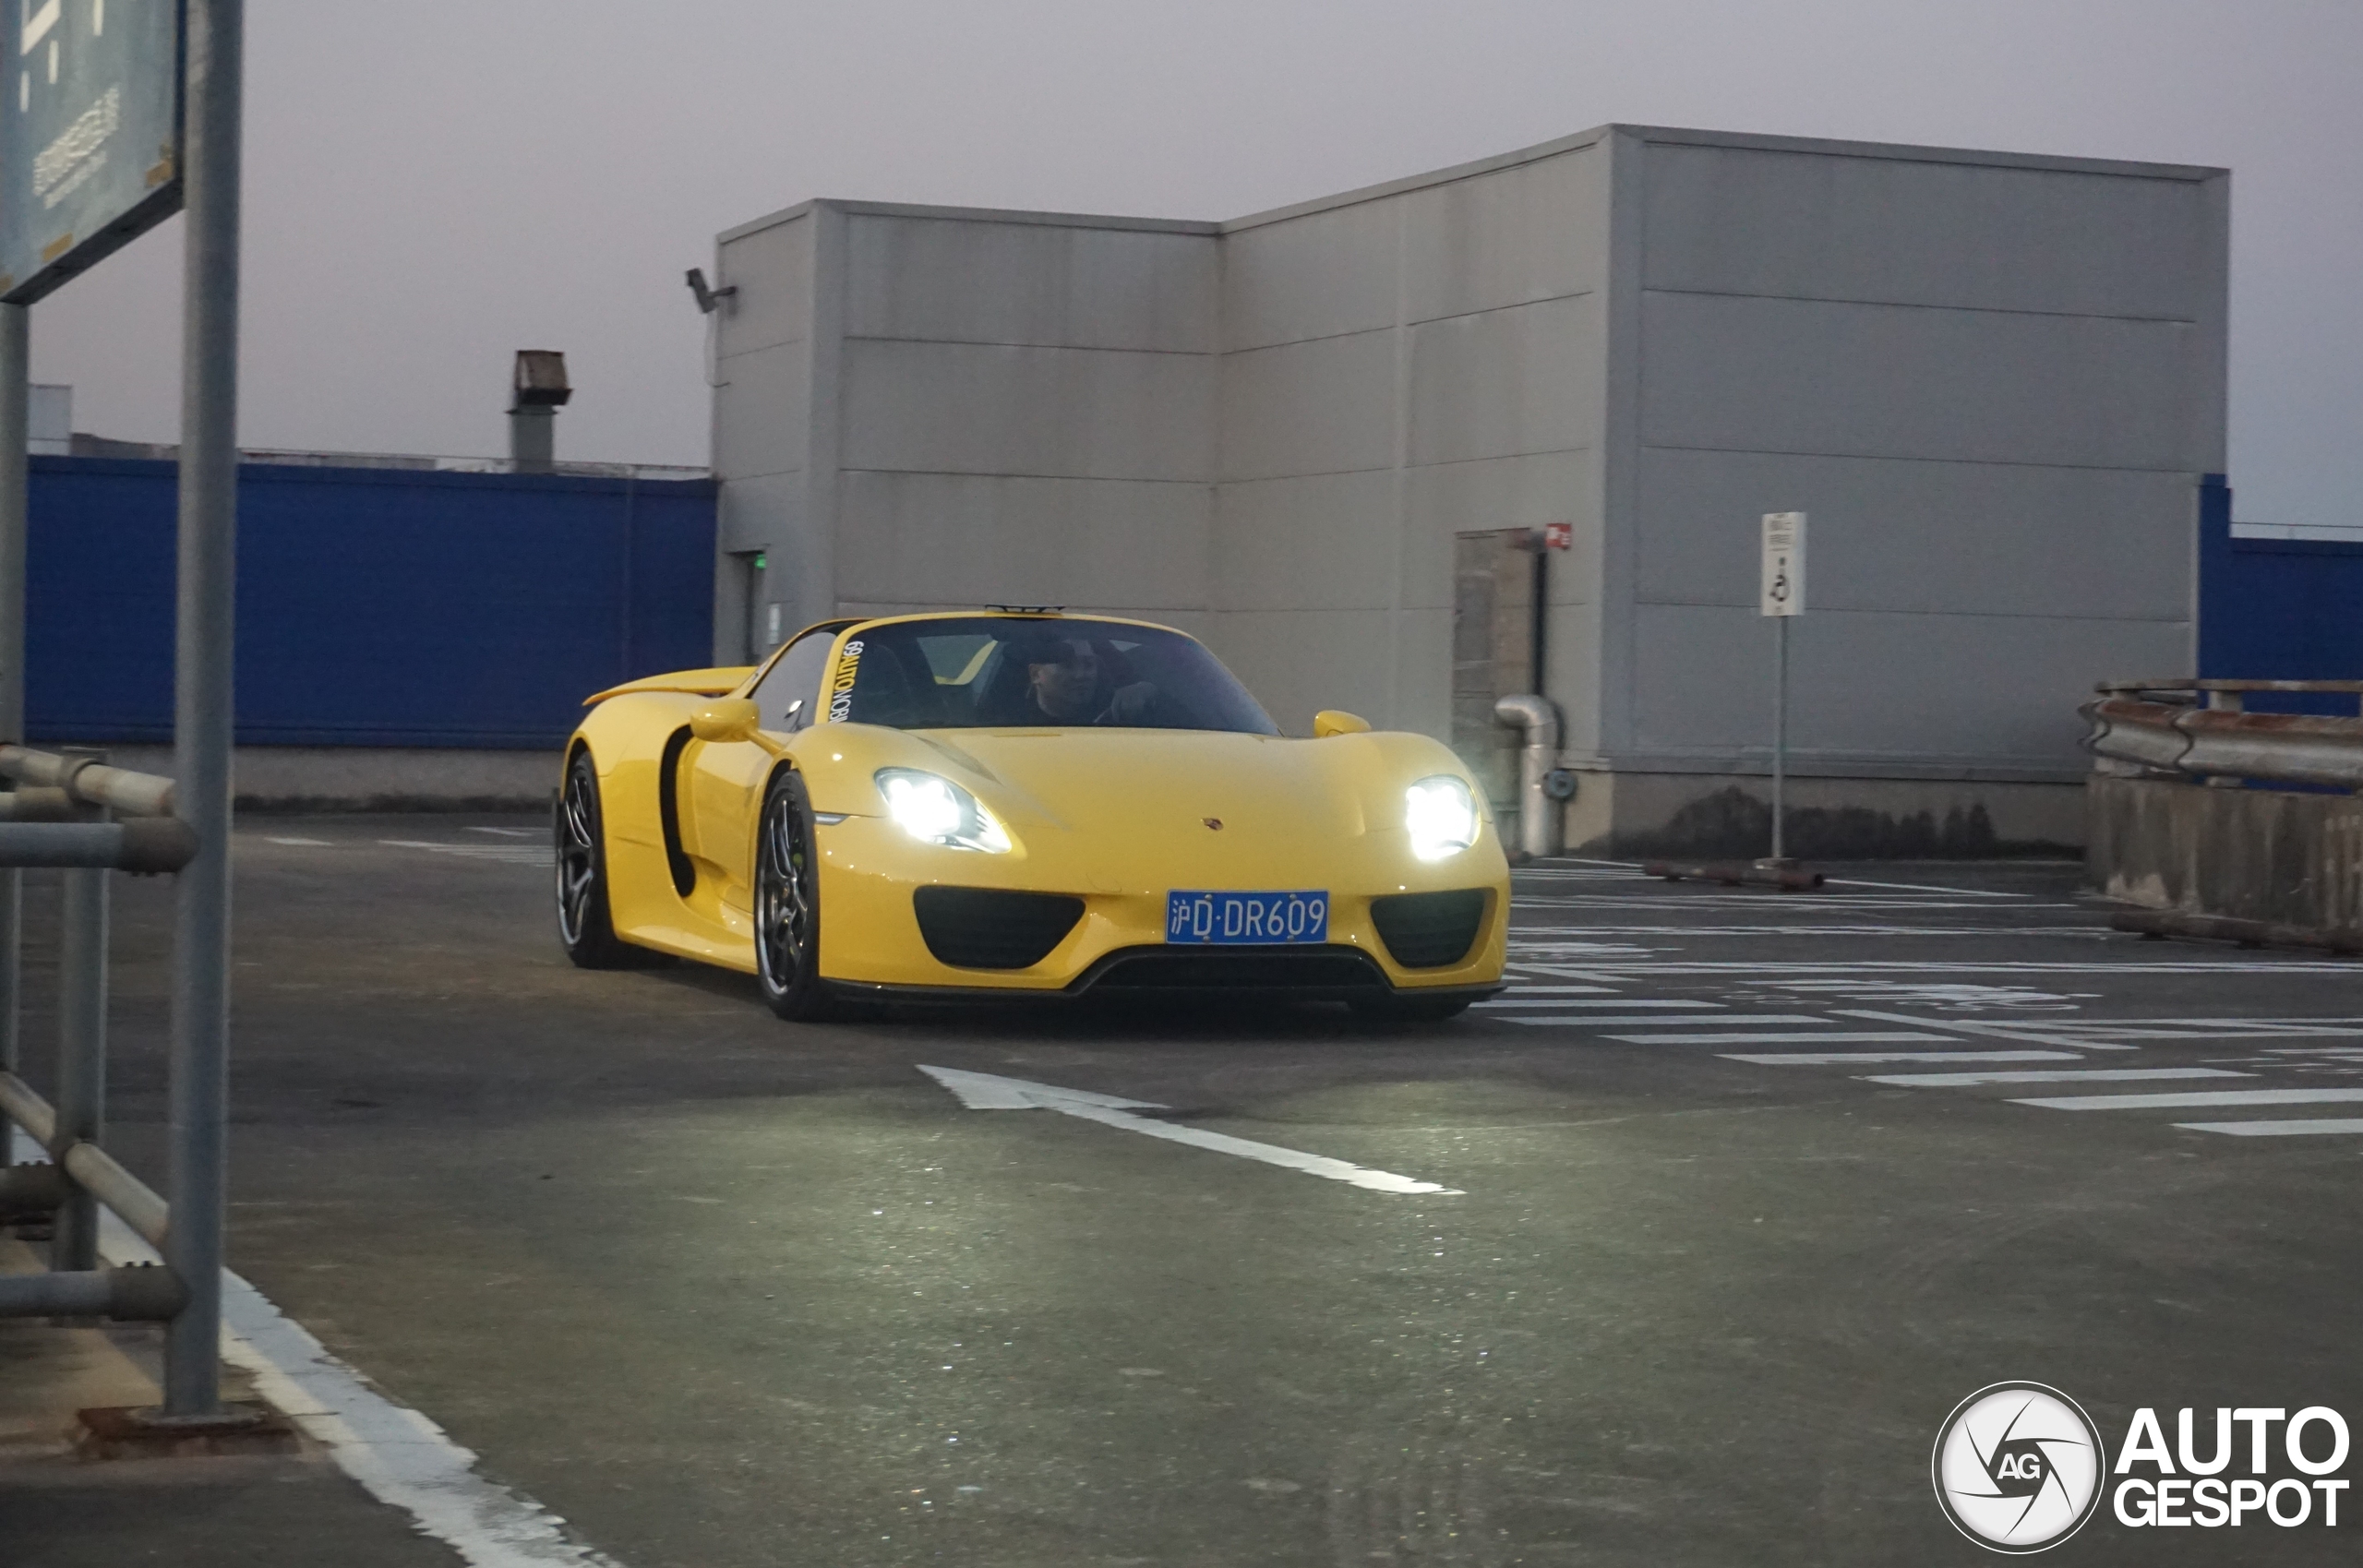 Taking the 918 to IKEA